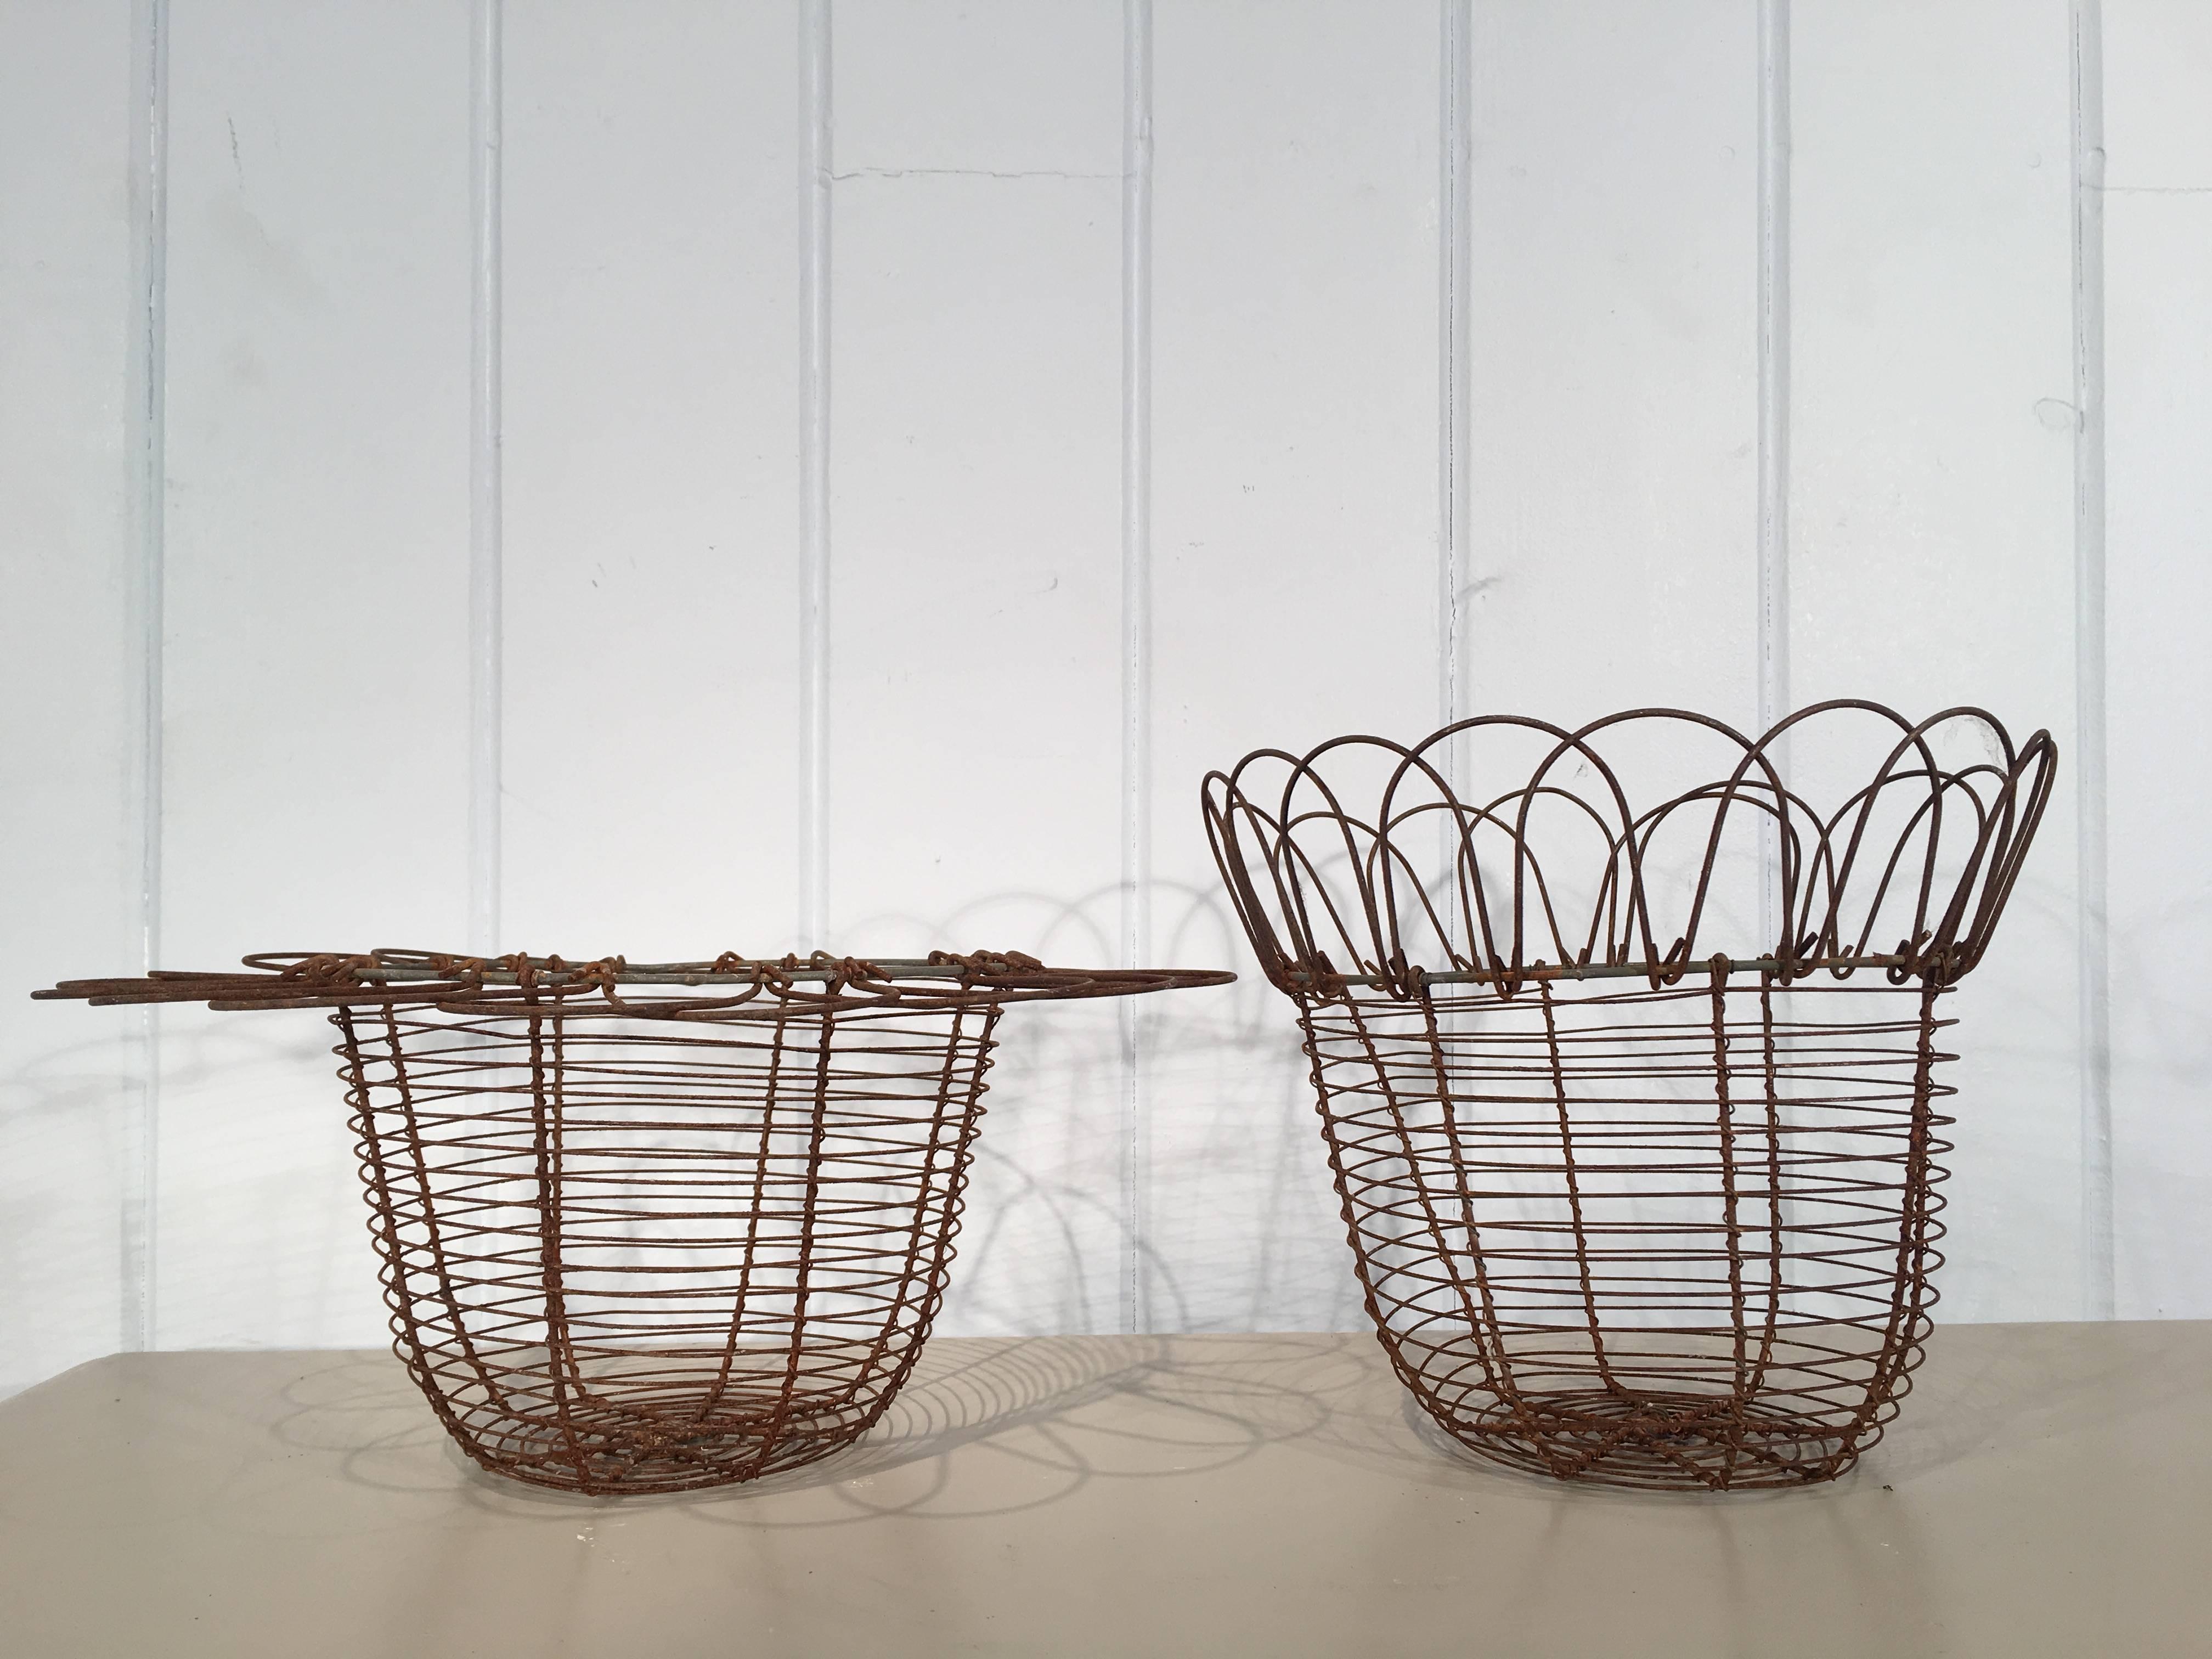 This lovely pair of wire egg baskets has adjustable rims that easily move up or down according to your mood. They are very hard to find these days and are in excellent condition. Use them in your kitchen to hold eggs or as tabletop decorations